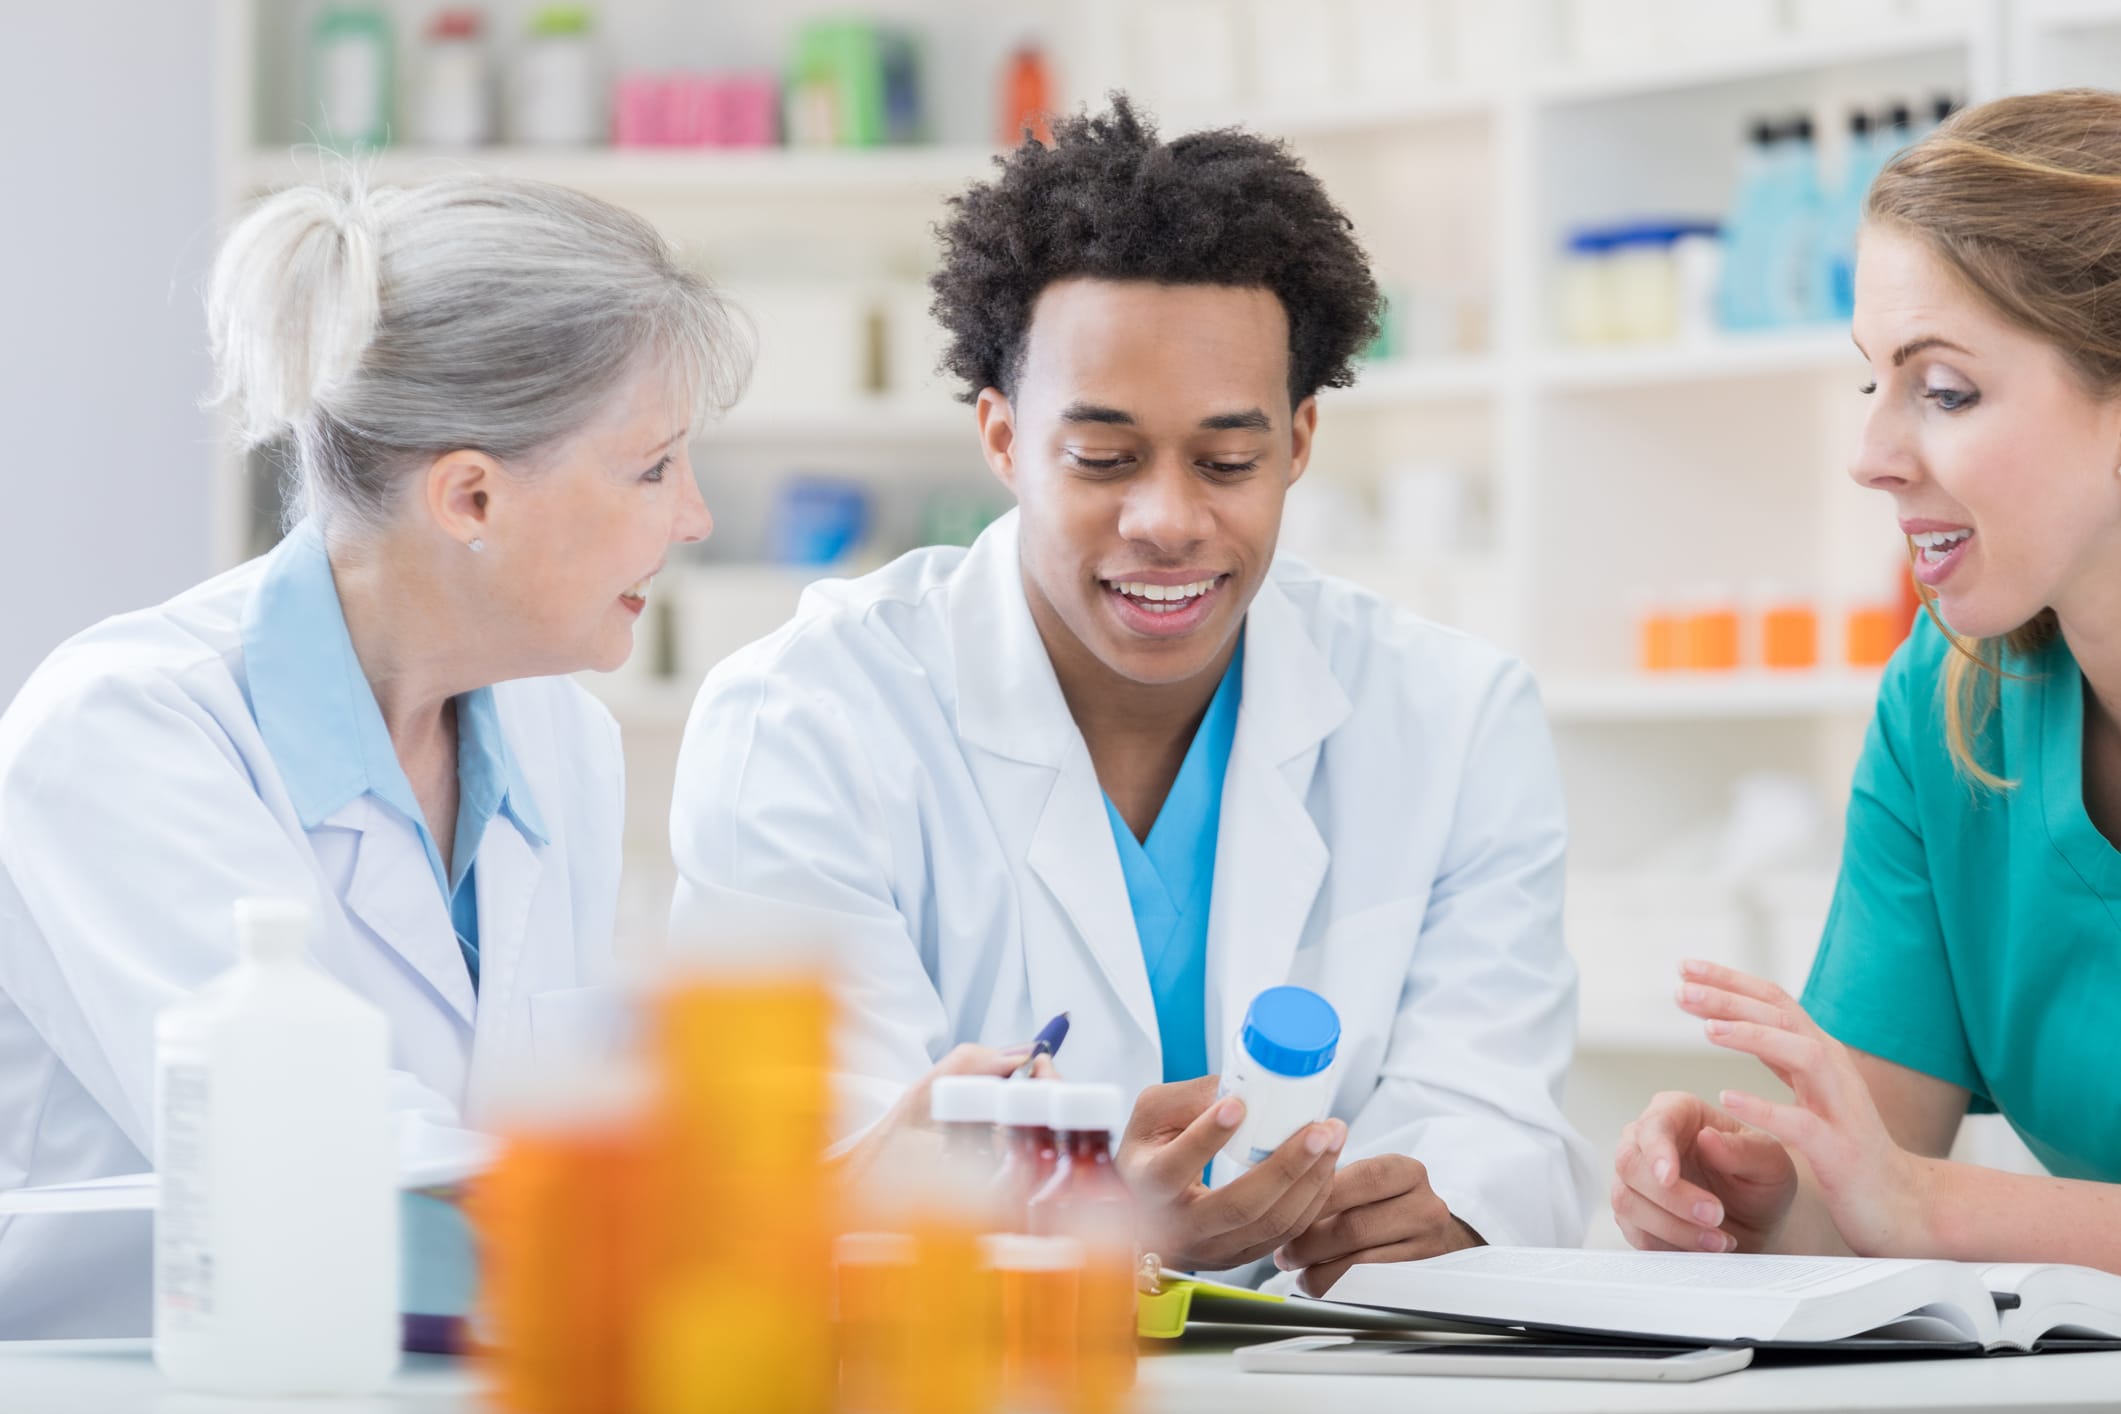 What Type of Courses Would You Need to Become a Pharmacy Technician?